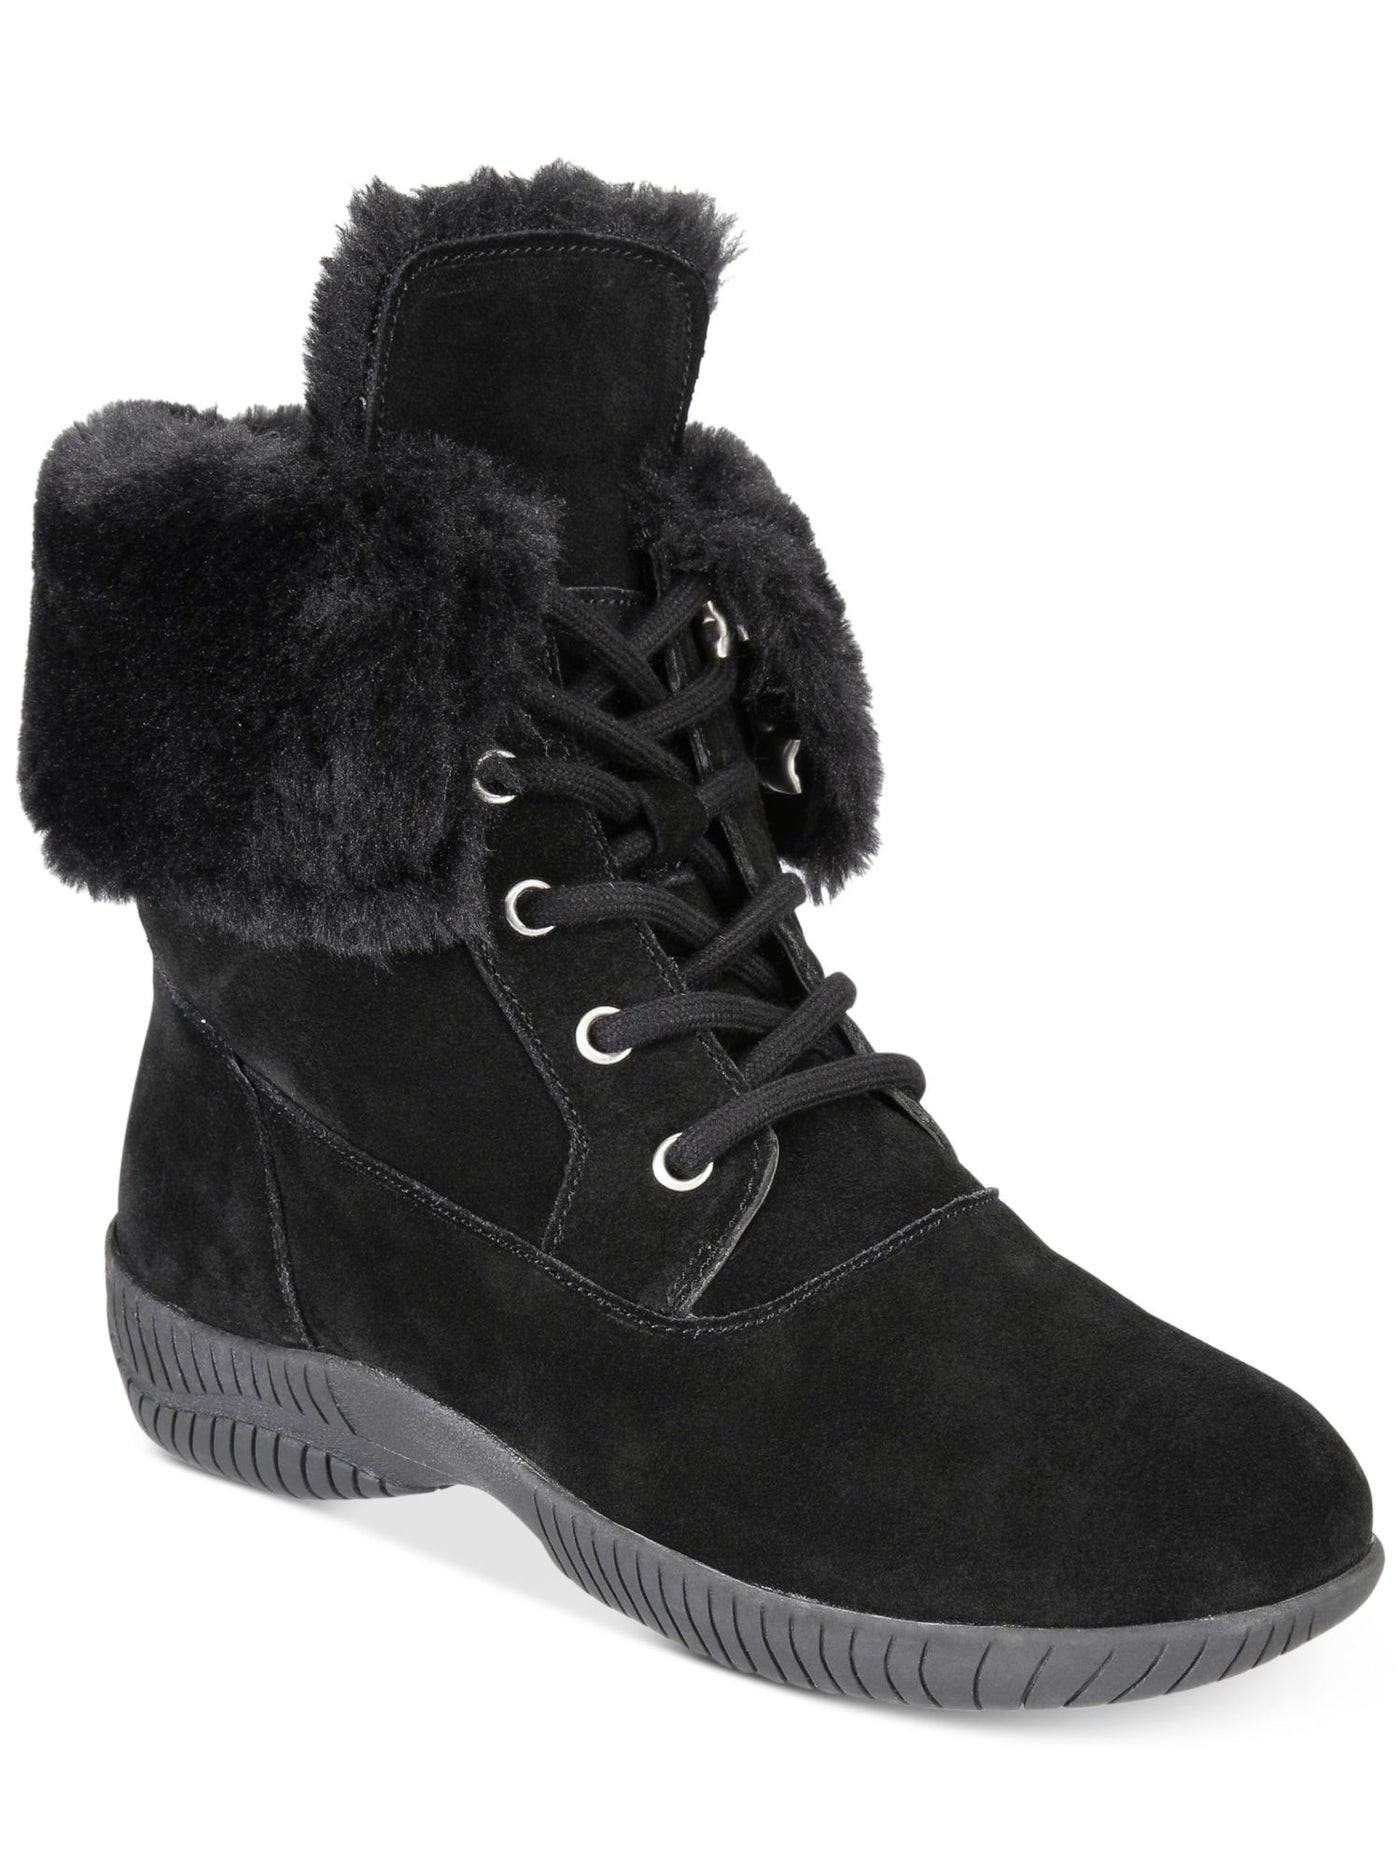 STYLE & COMPANY Womens Black Cuff Fold, Angiee Round Toe Block Heel Lace-Up Leather Snow Boots 5 M